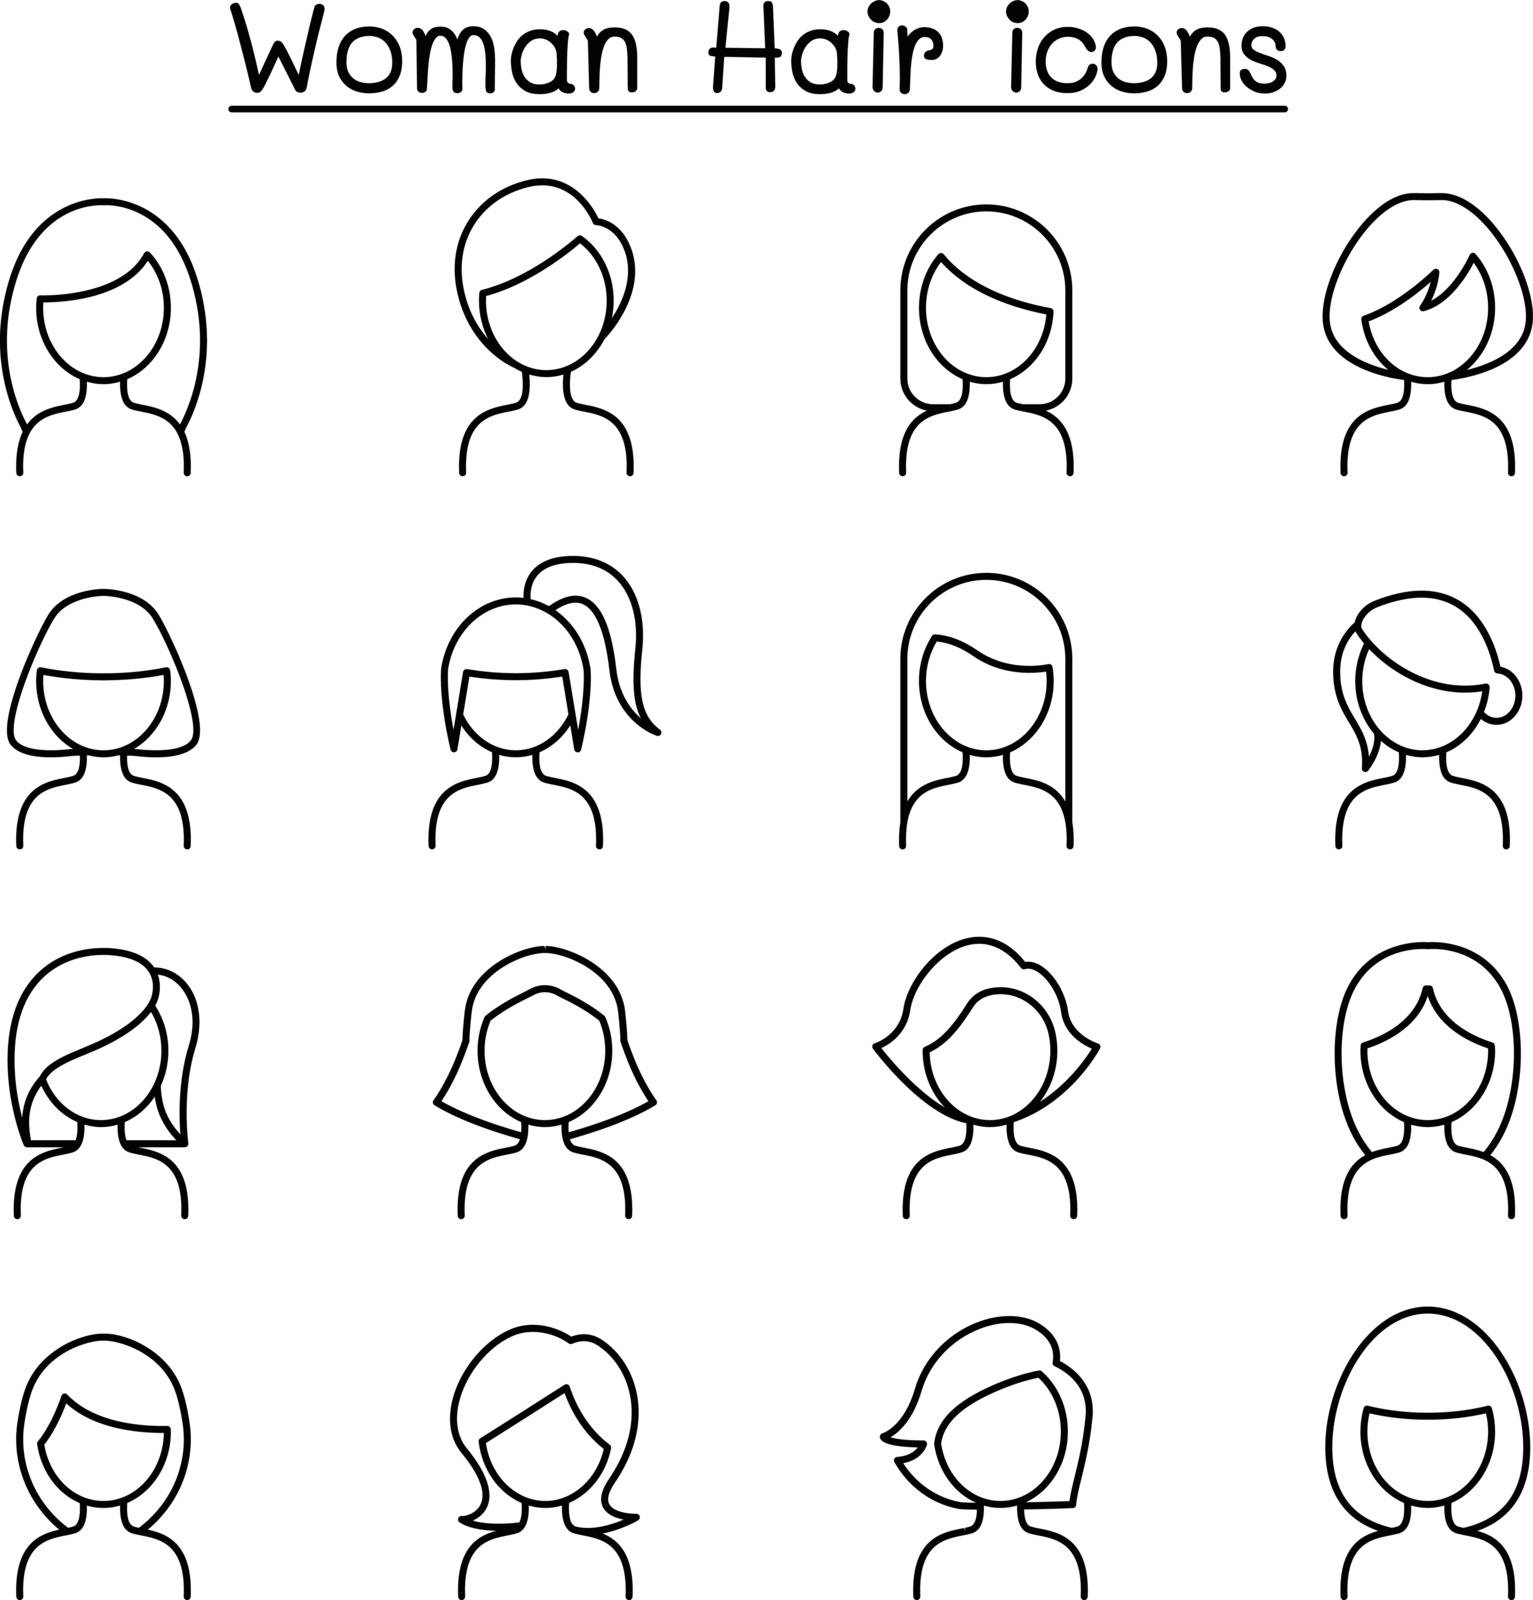 Woman Hair Style icon set in thin line style